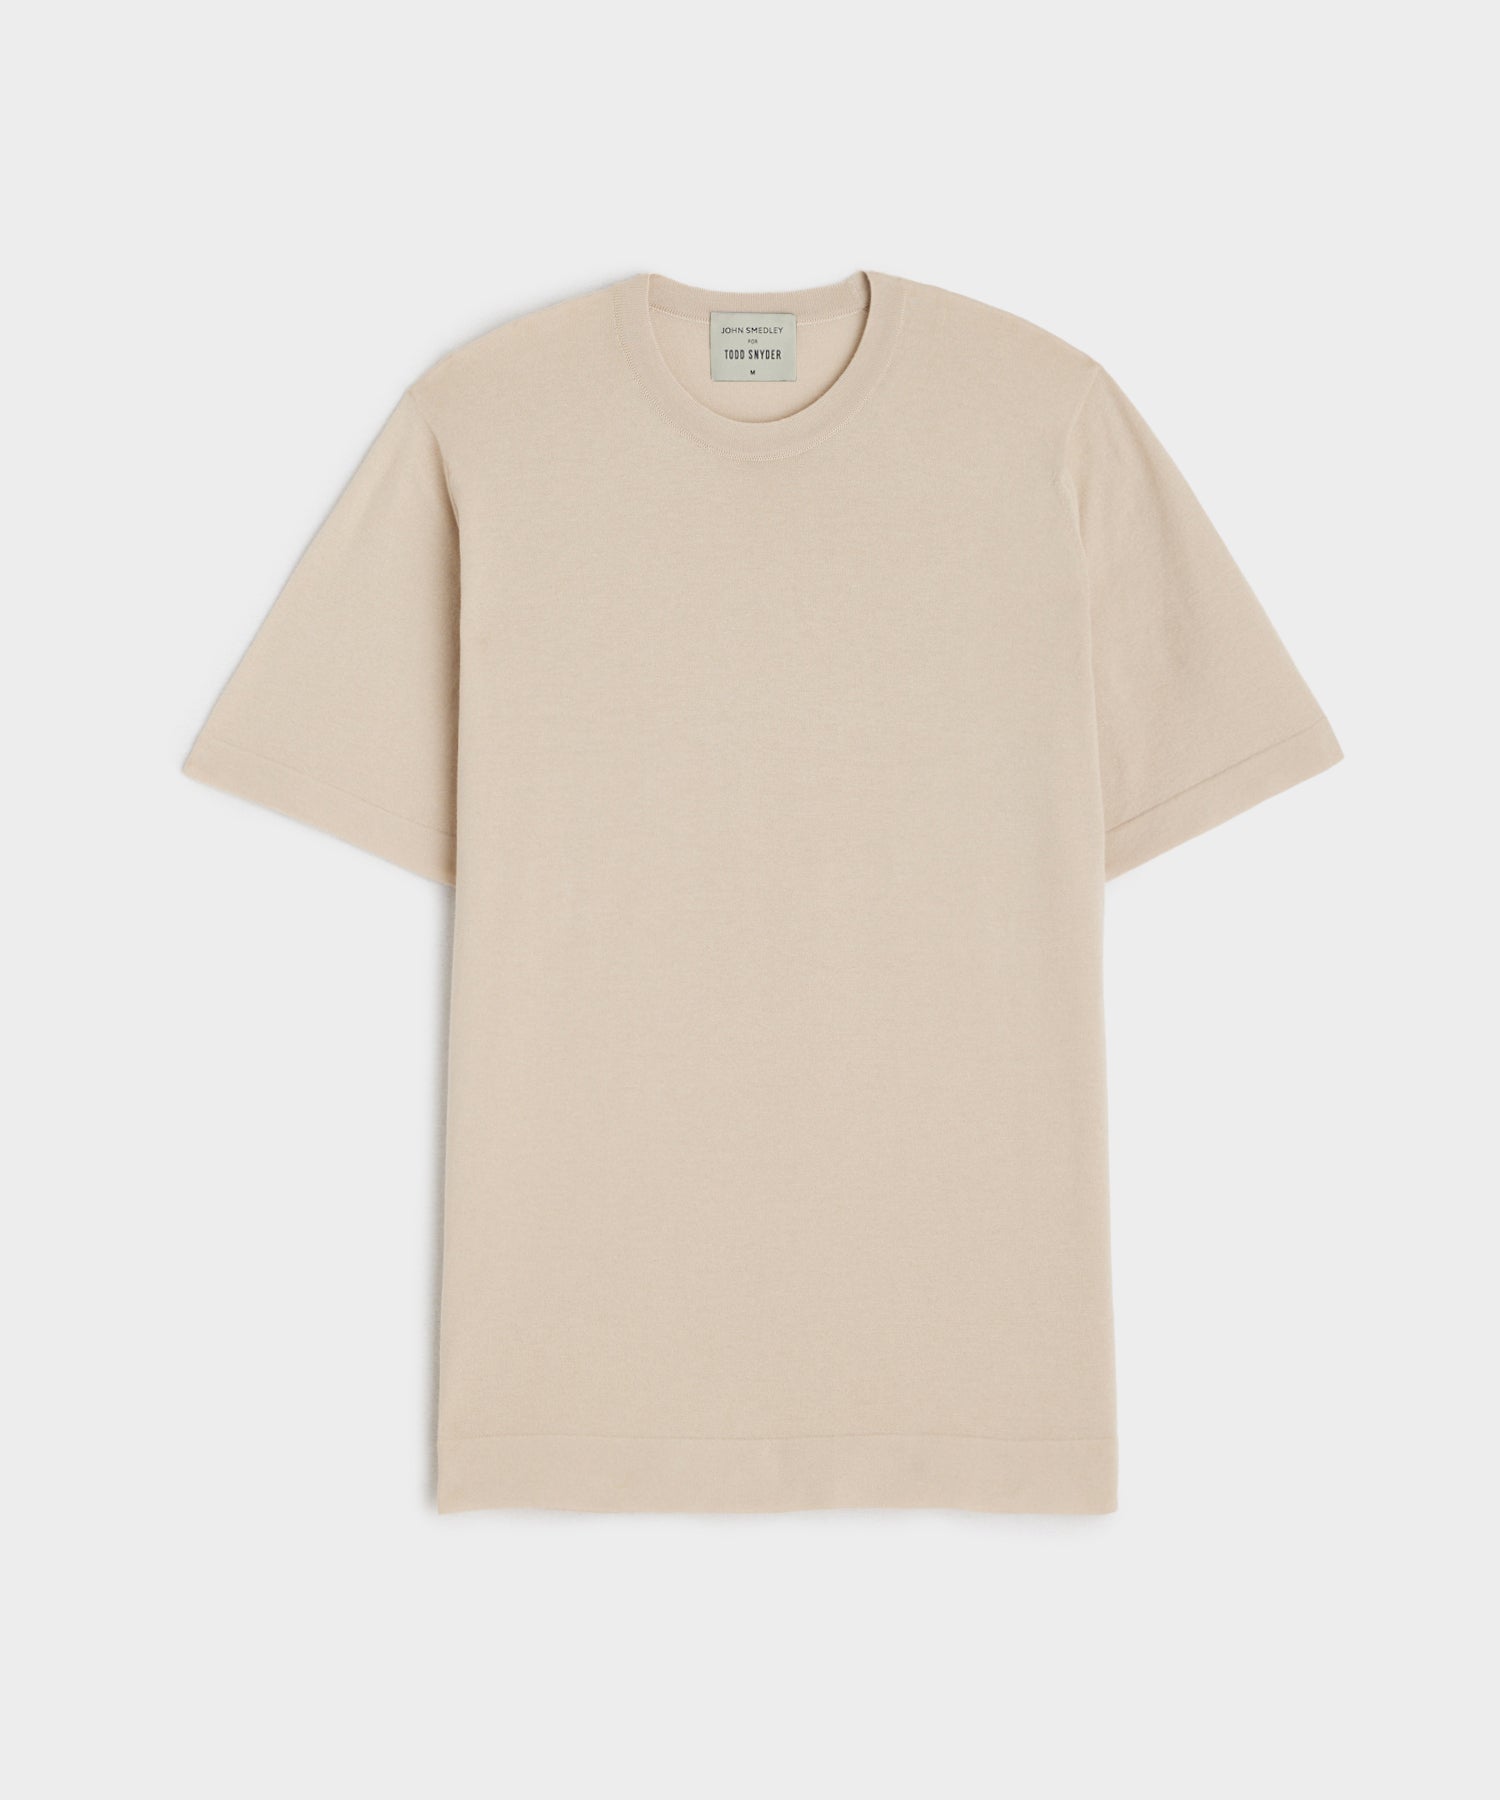 John Smedley x Todd Snyder Lorca Short Sleeve Knit Shirt in Toasted Almond